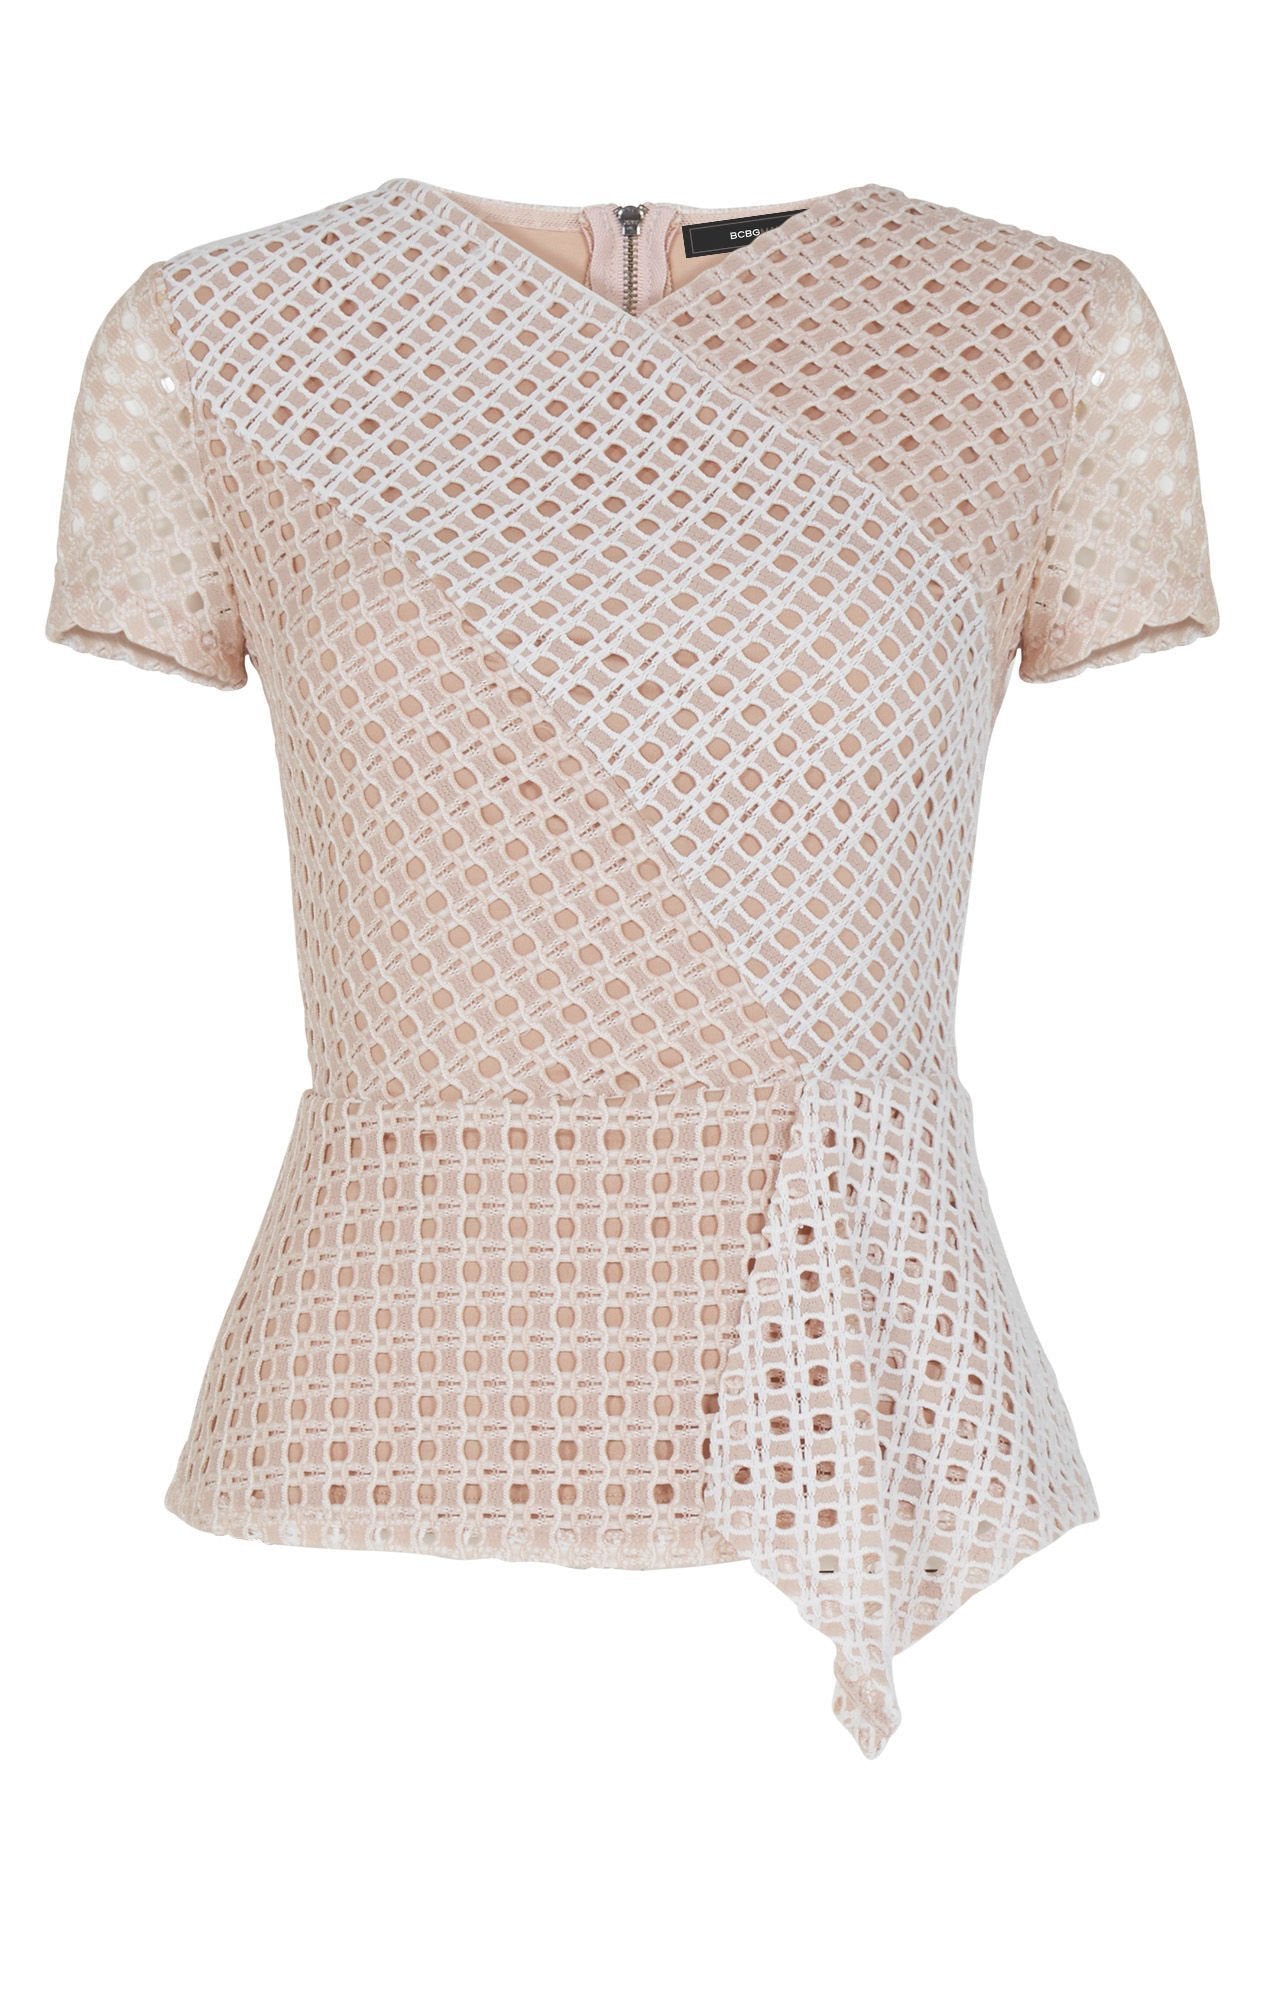 Woman wearing a top rental from BCBGMAXAZRIA called Kaleigh Lace-blocked Peplum Top